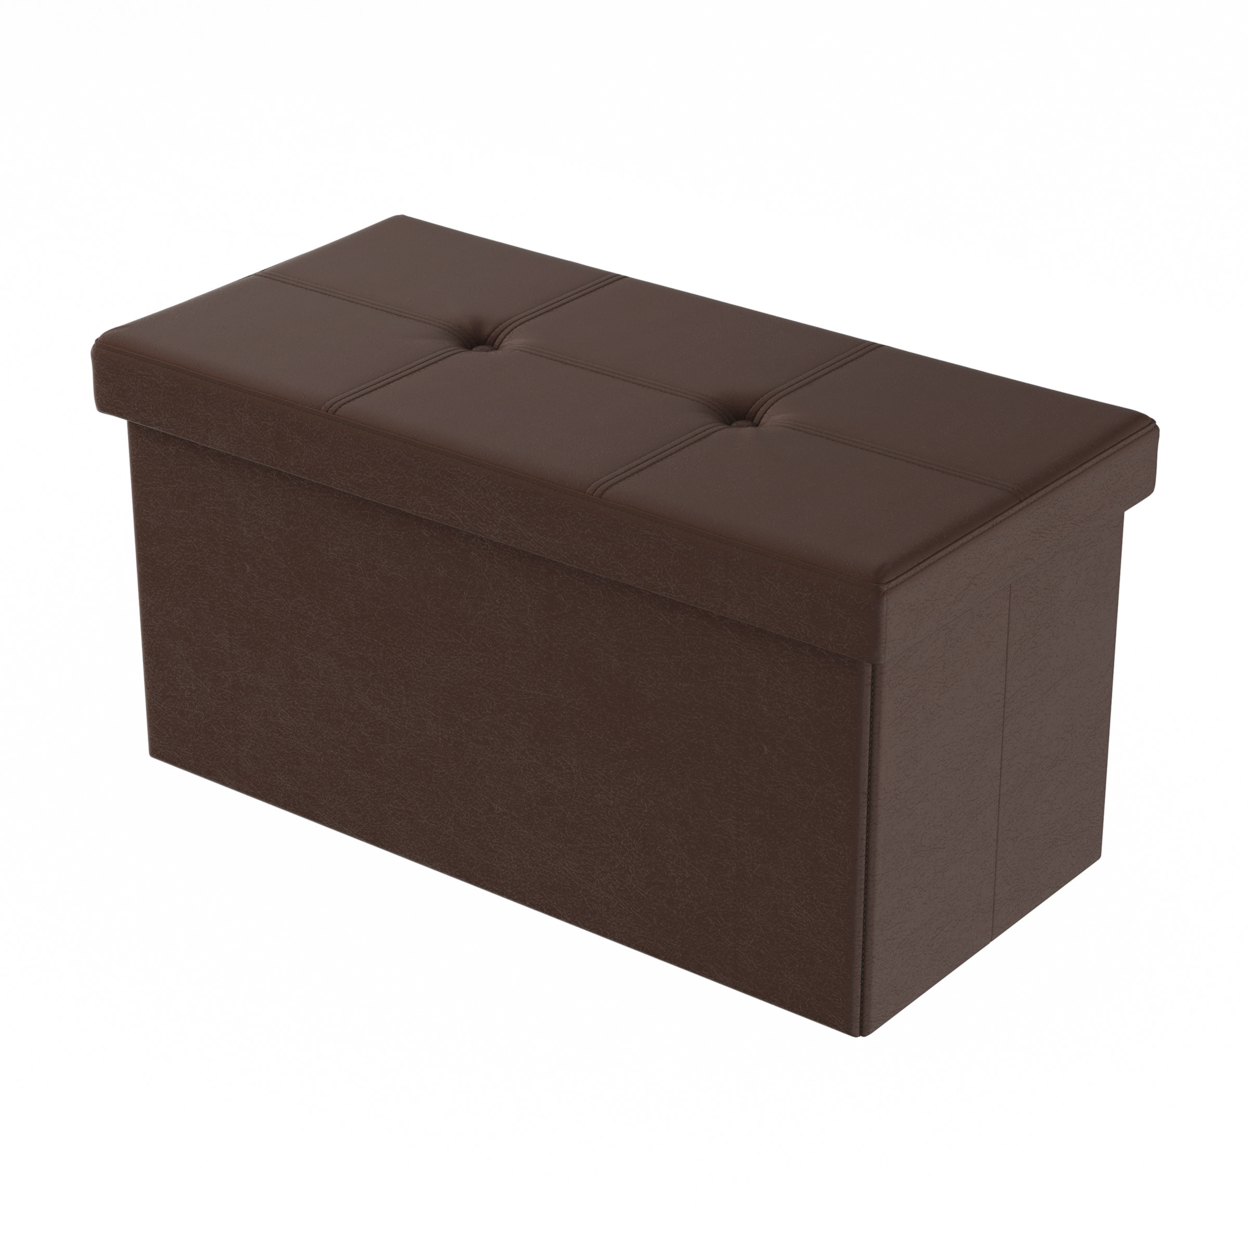 Large Foldable Storage Bench Ottoman Tufted Faux Leather Cube Organizer Furniture Brown 30 X 15